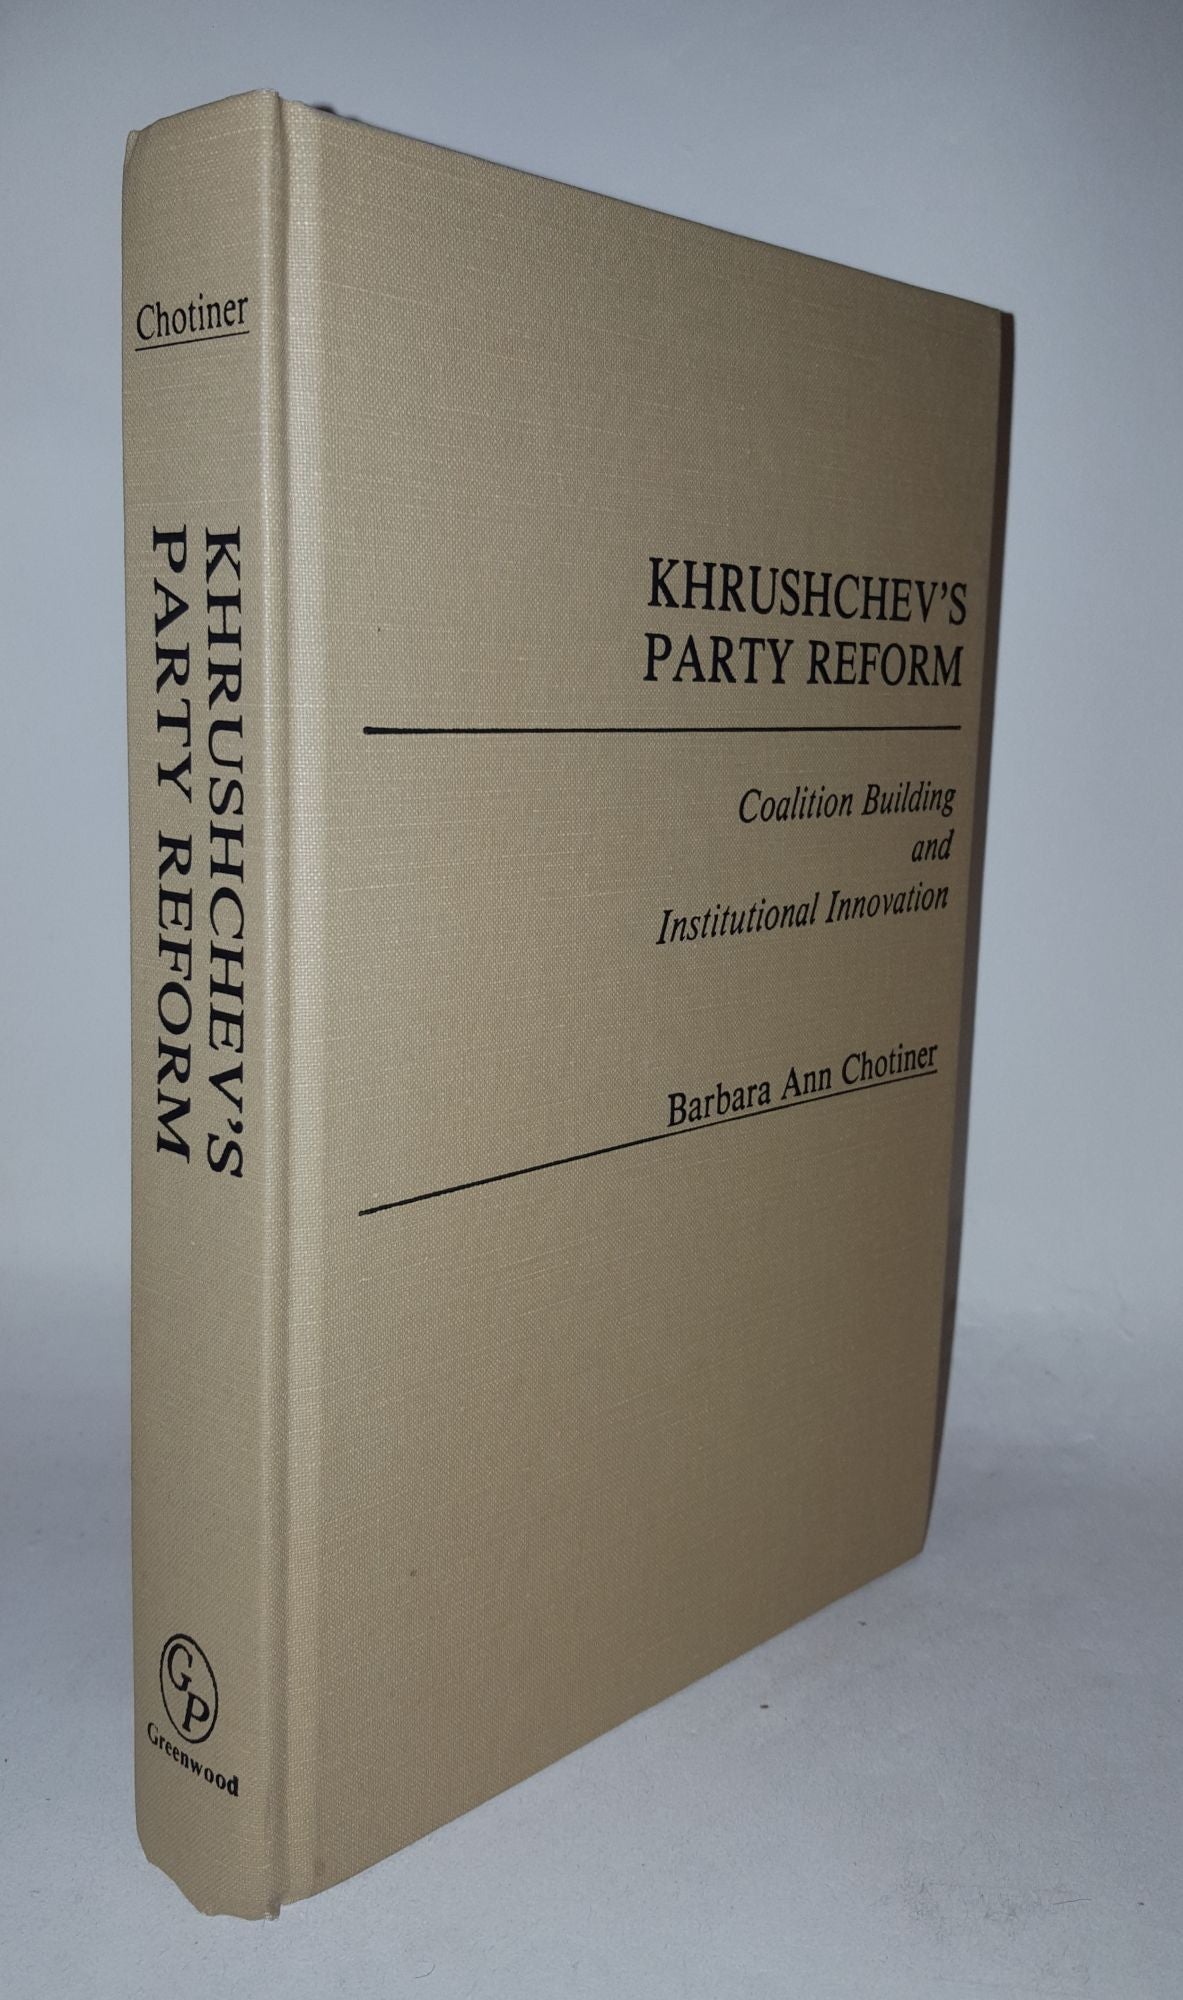 CHOTINER Barbara Ann - Khrushchev's Party Reform Coalition Building and Institutional Innovation